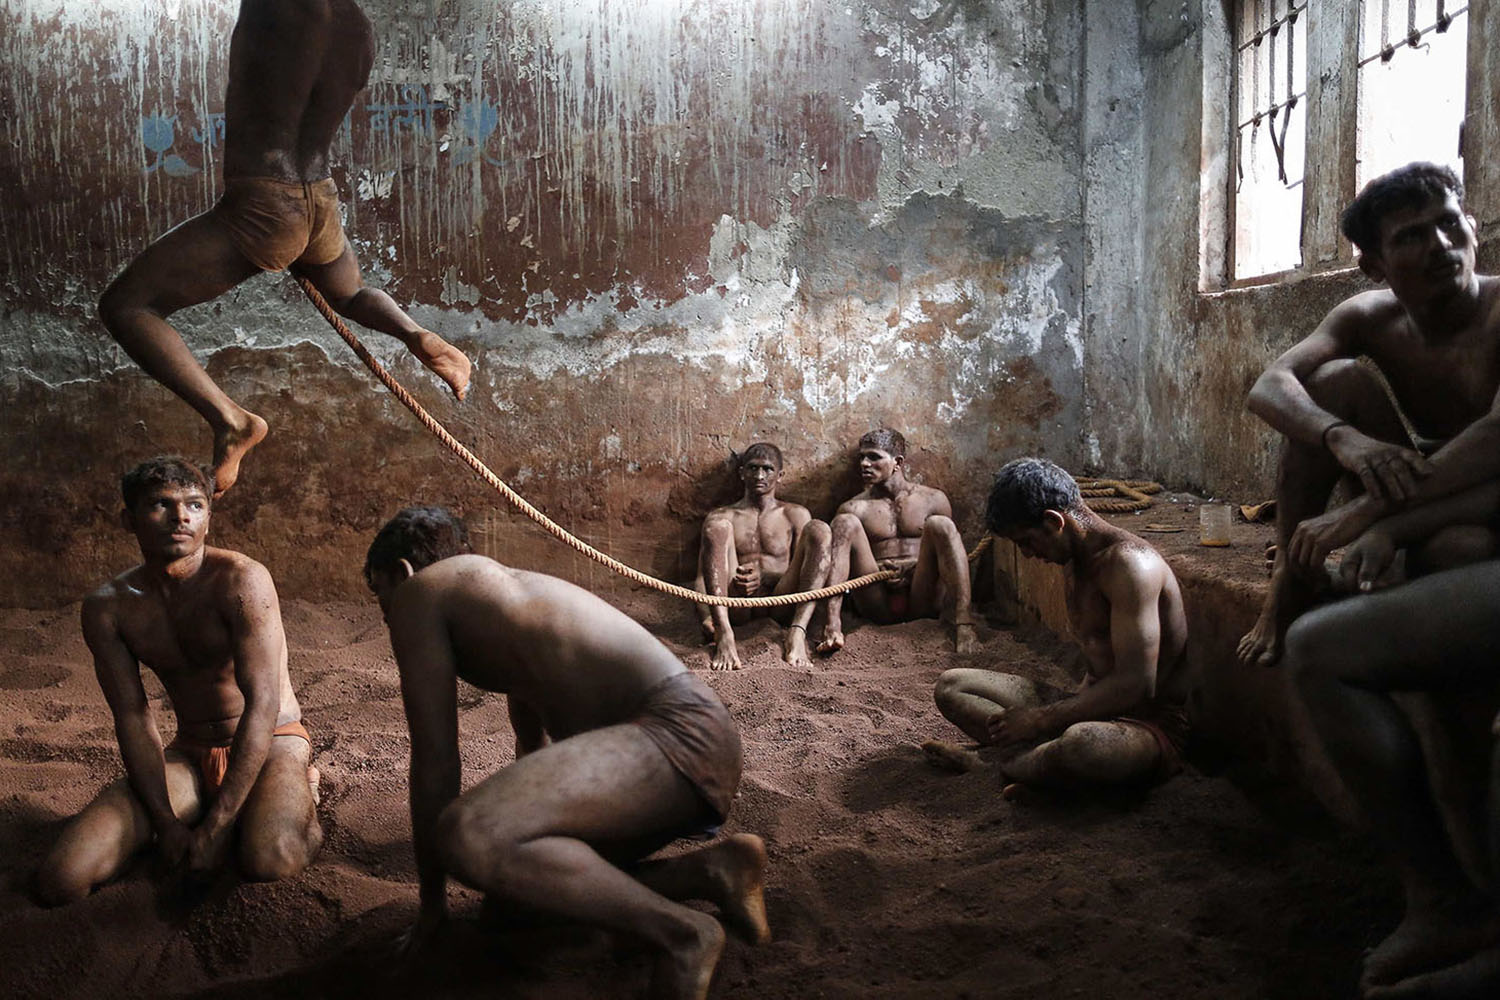 Wrestlers practise as others rest in the mud at a traditional Indian wrestling centre called Akhaara in Mumbai